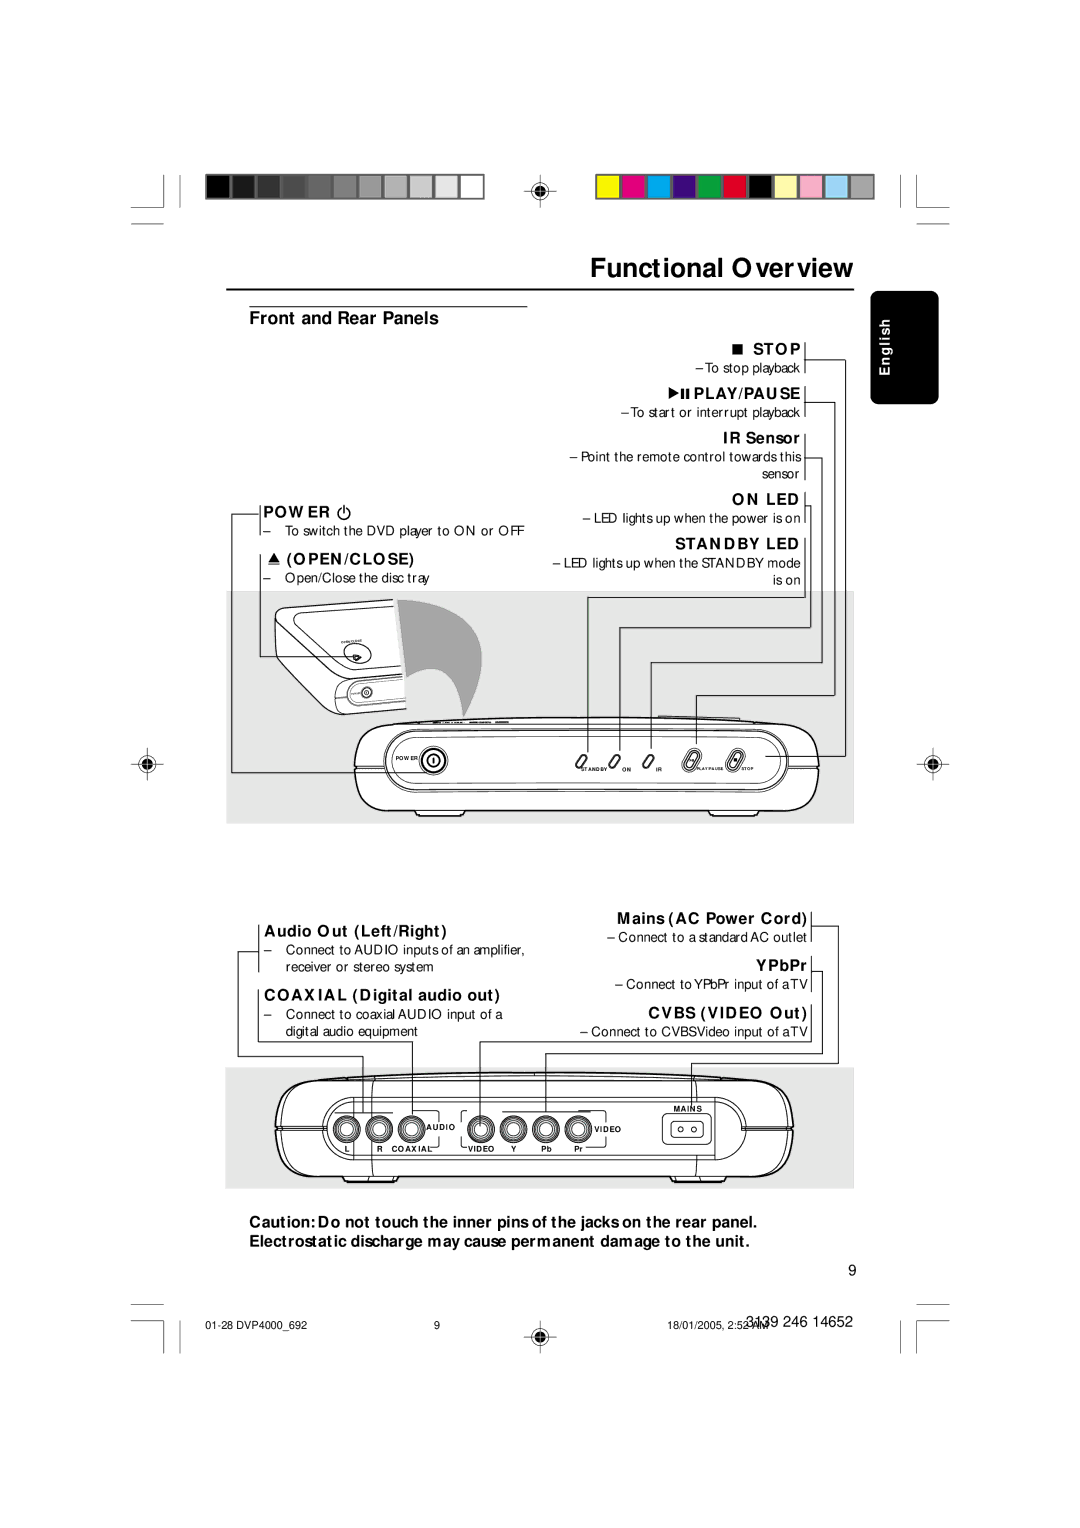 Philips 4000 user manual Functional Overview, Front and Rear Panels 